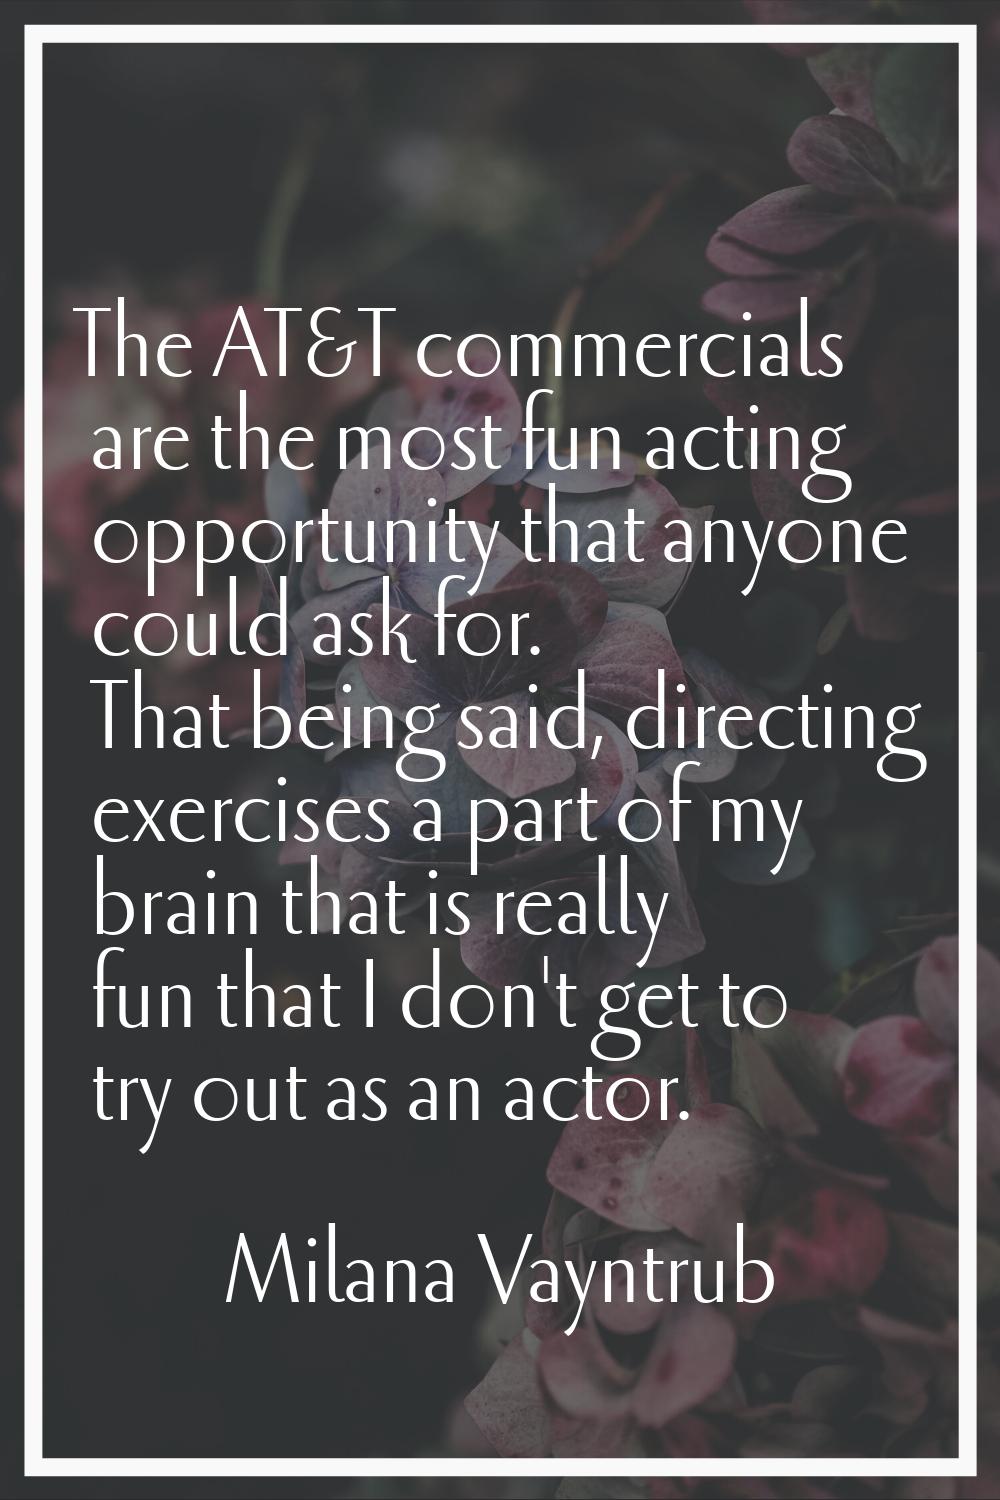 The AT&T commercials are the most fun acting opportunity that anyone could ask for. That being said